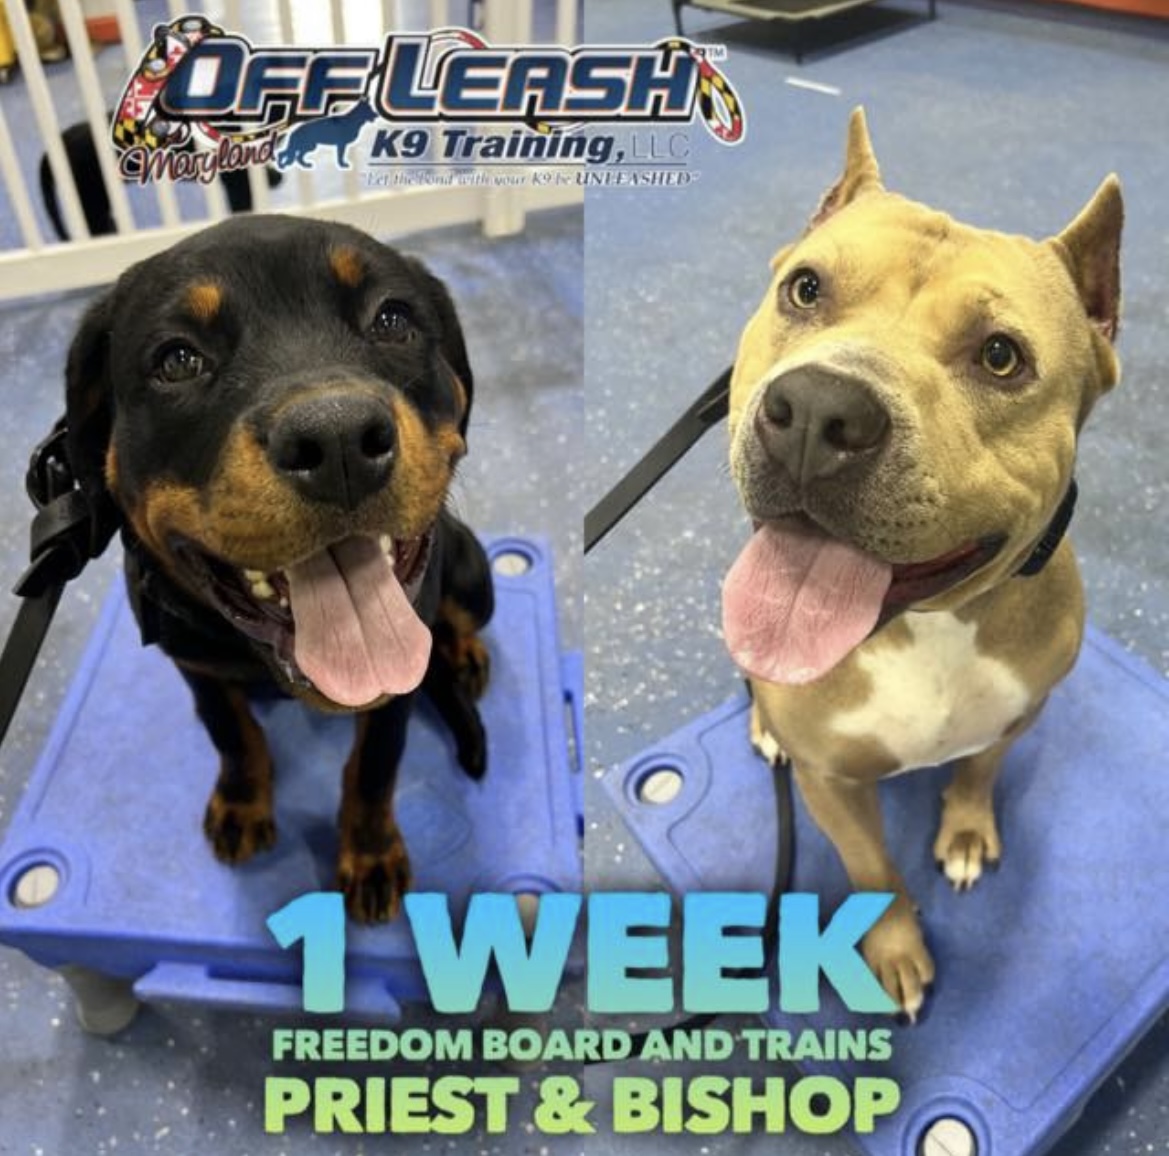 Dogs, Priest and Bishop, who completed our 1 week board and train program